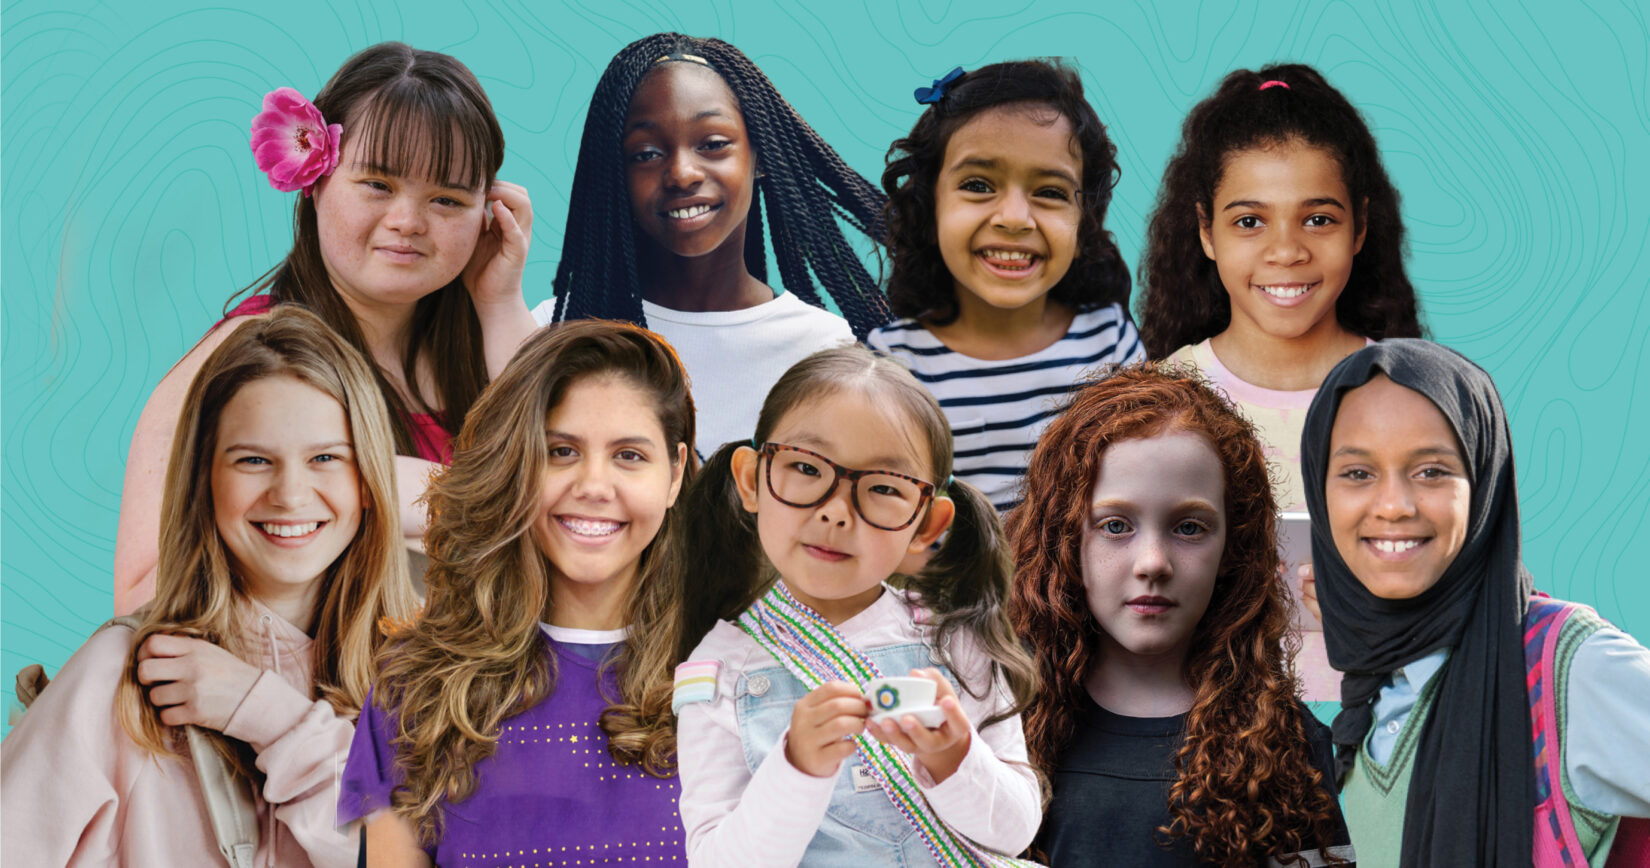 A collage of girls is featured against a turquoise background.